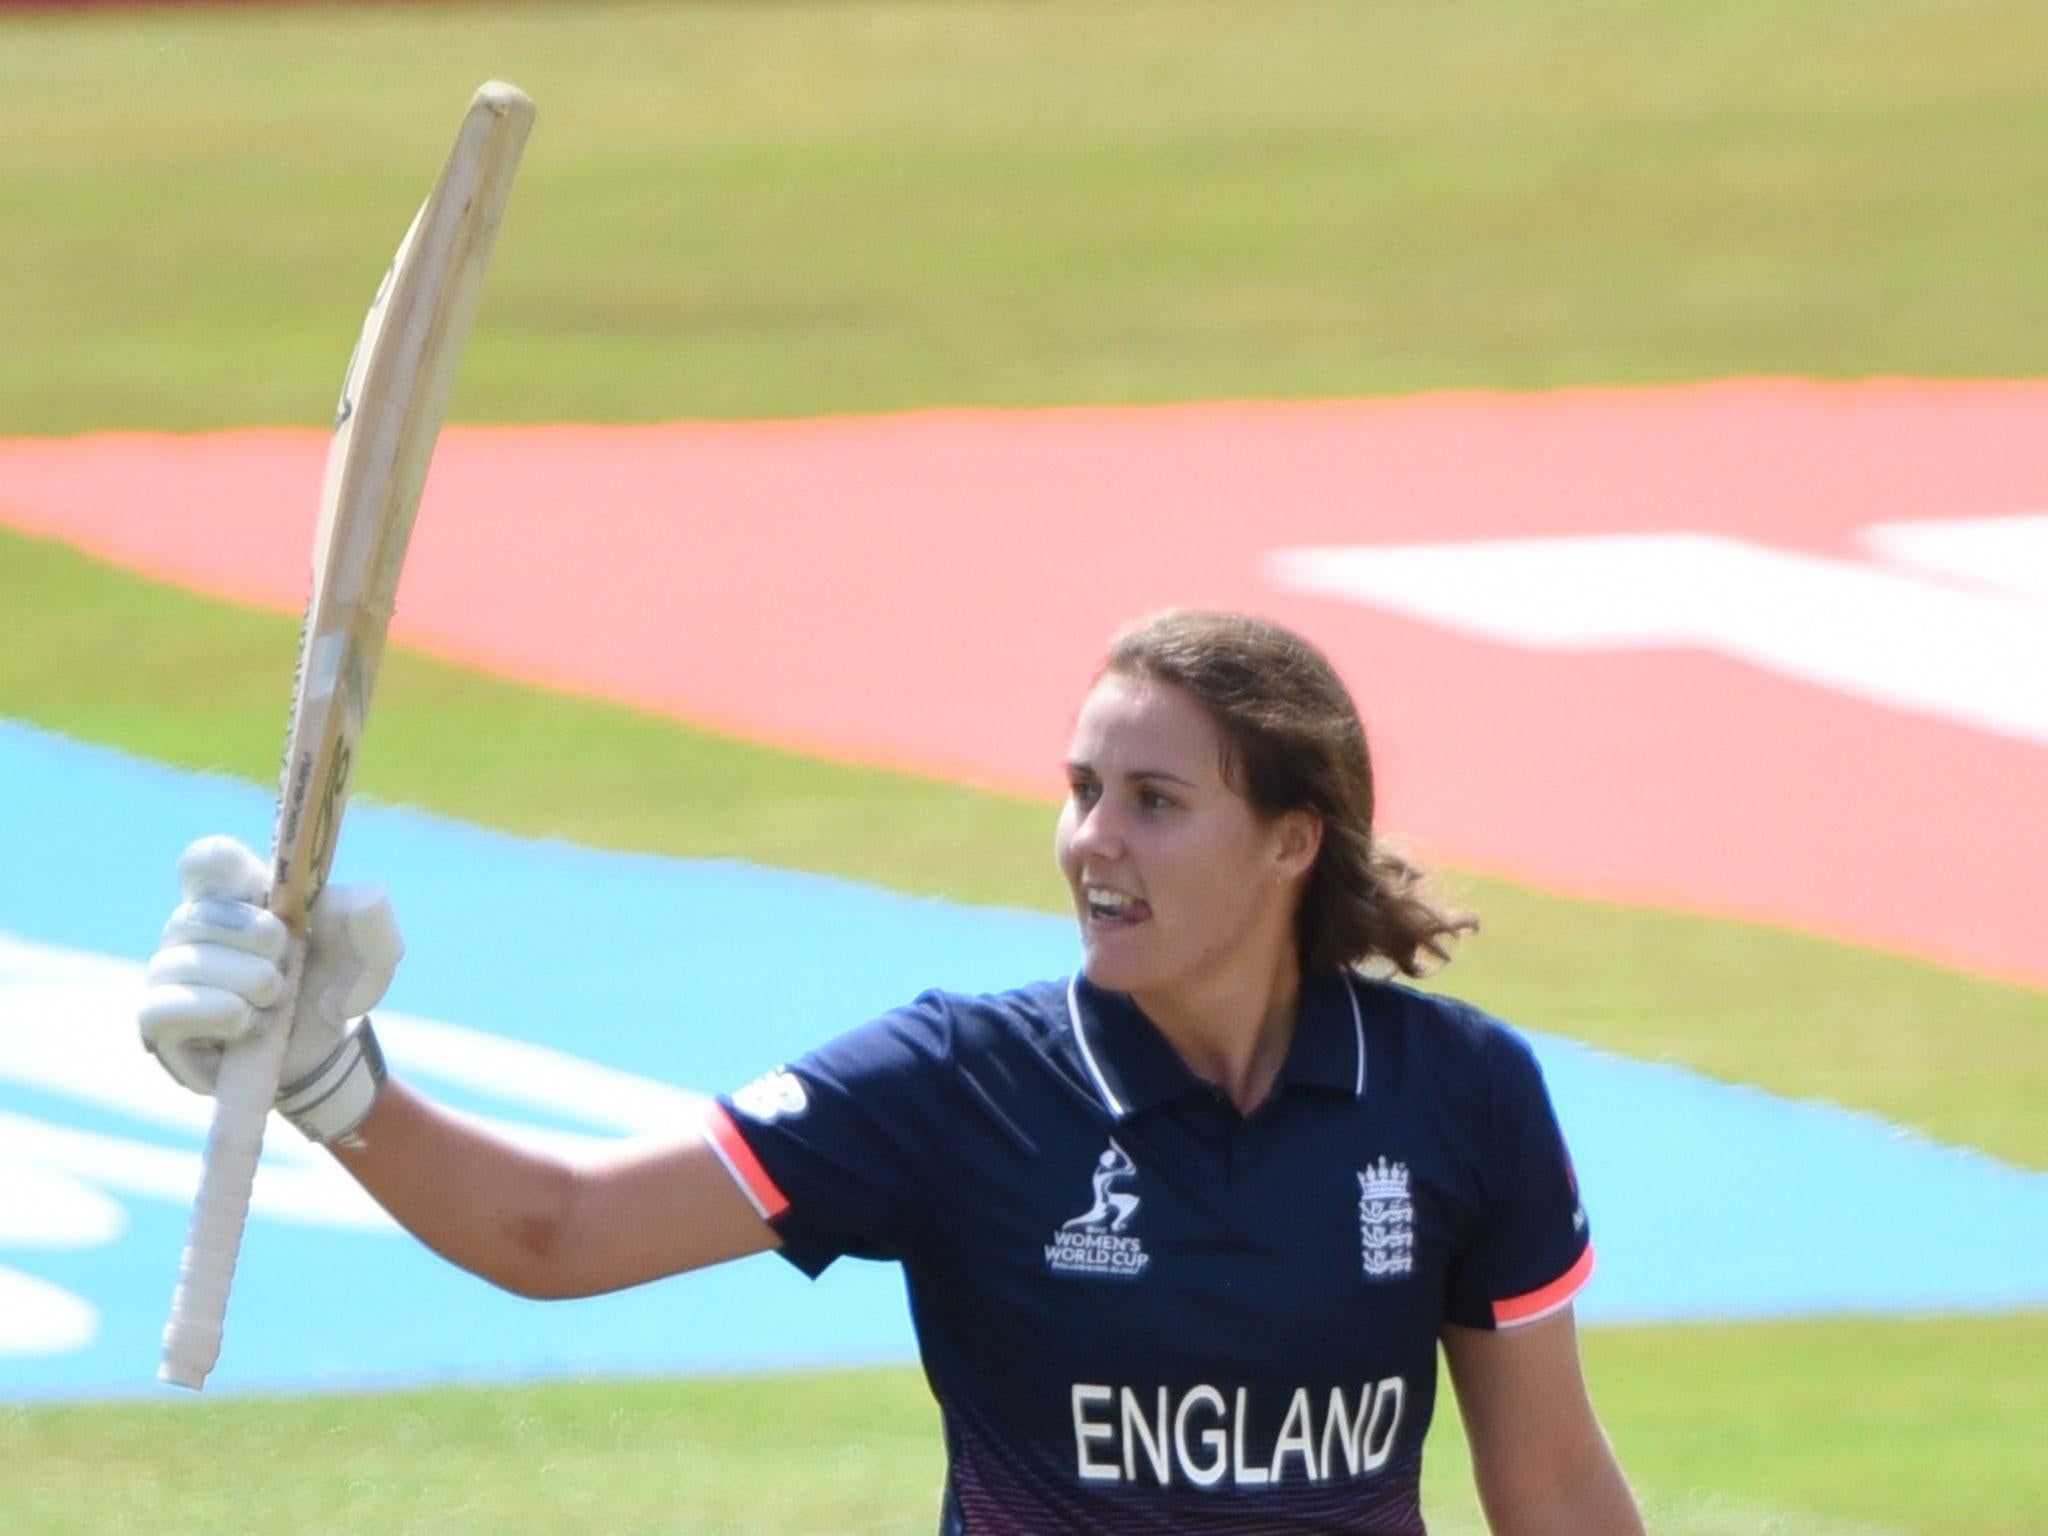 Natalie Sciver is ready to lead England's charge in the World Cup final